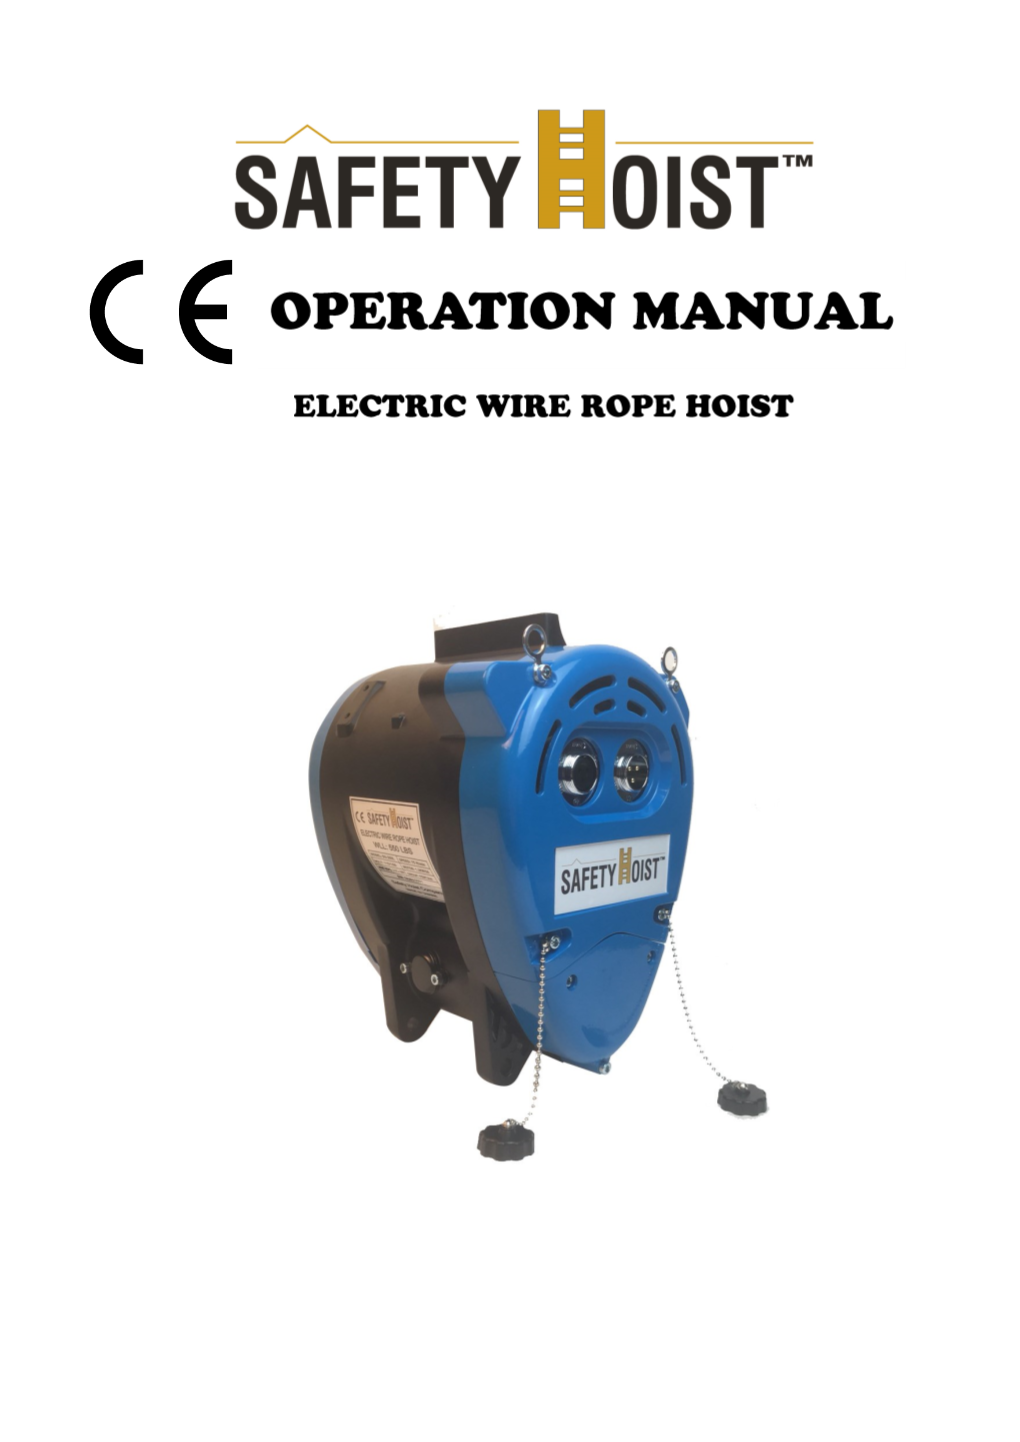 SAFETY HOIST Electric Wire Rope Hoist Introduction